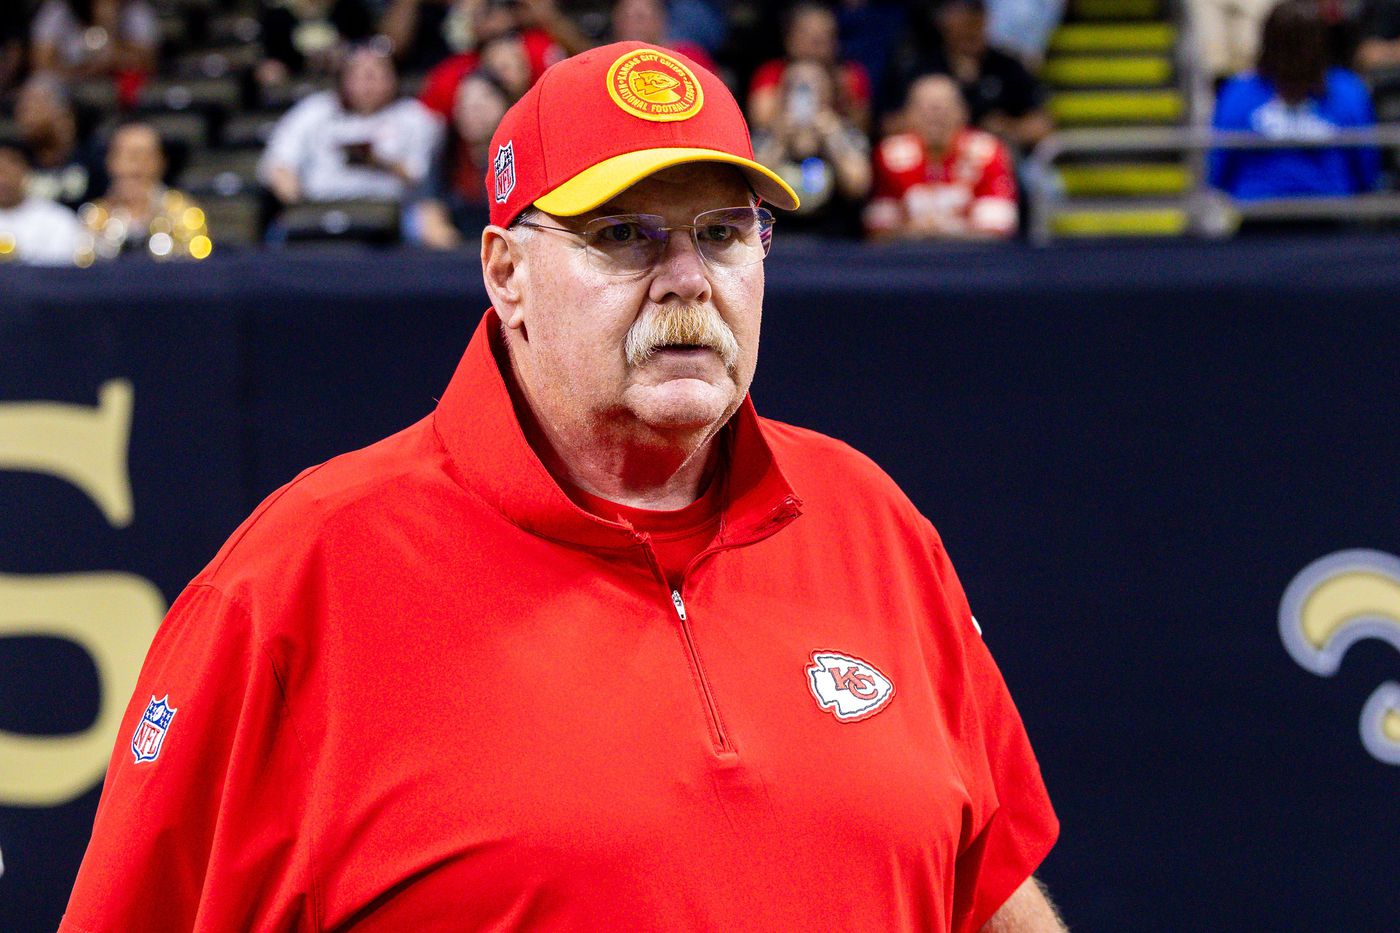 Andy Reid Biography, Age, Height, Career, Wife, Children, Net Worth